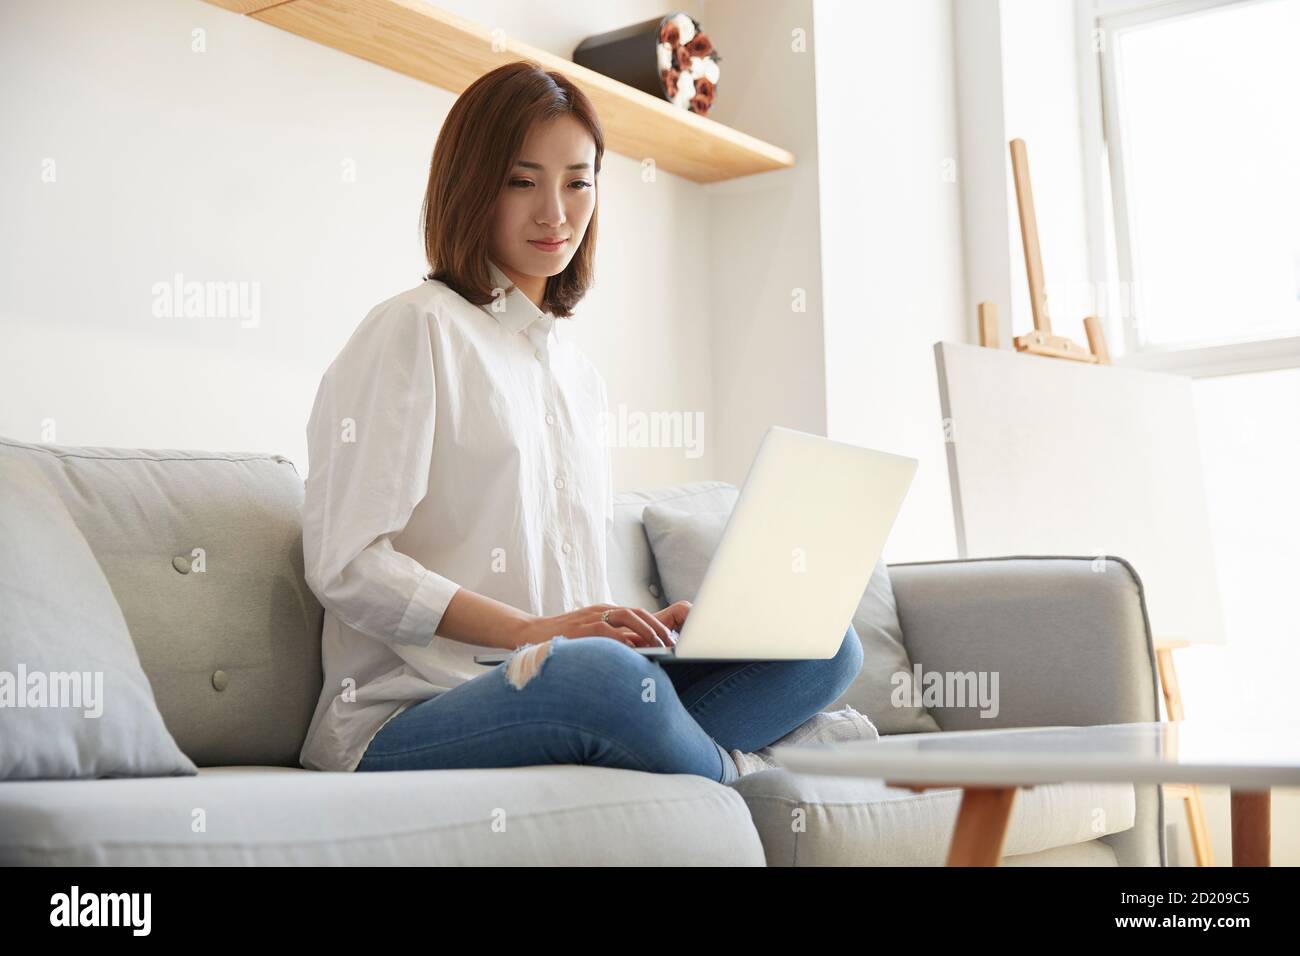 young asian business woman working at home sitting on couch using laptop computer Stock Photo